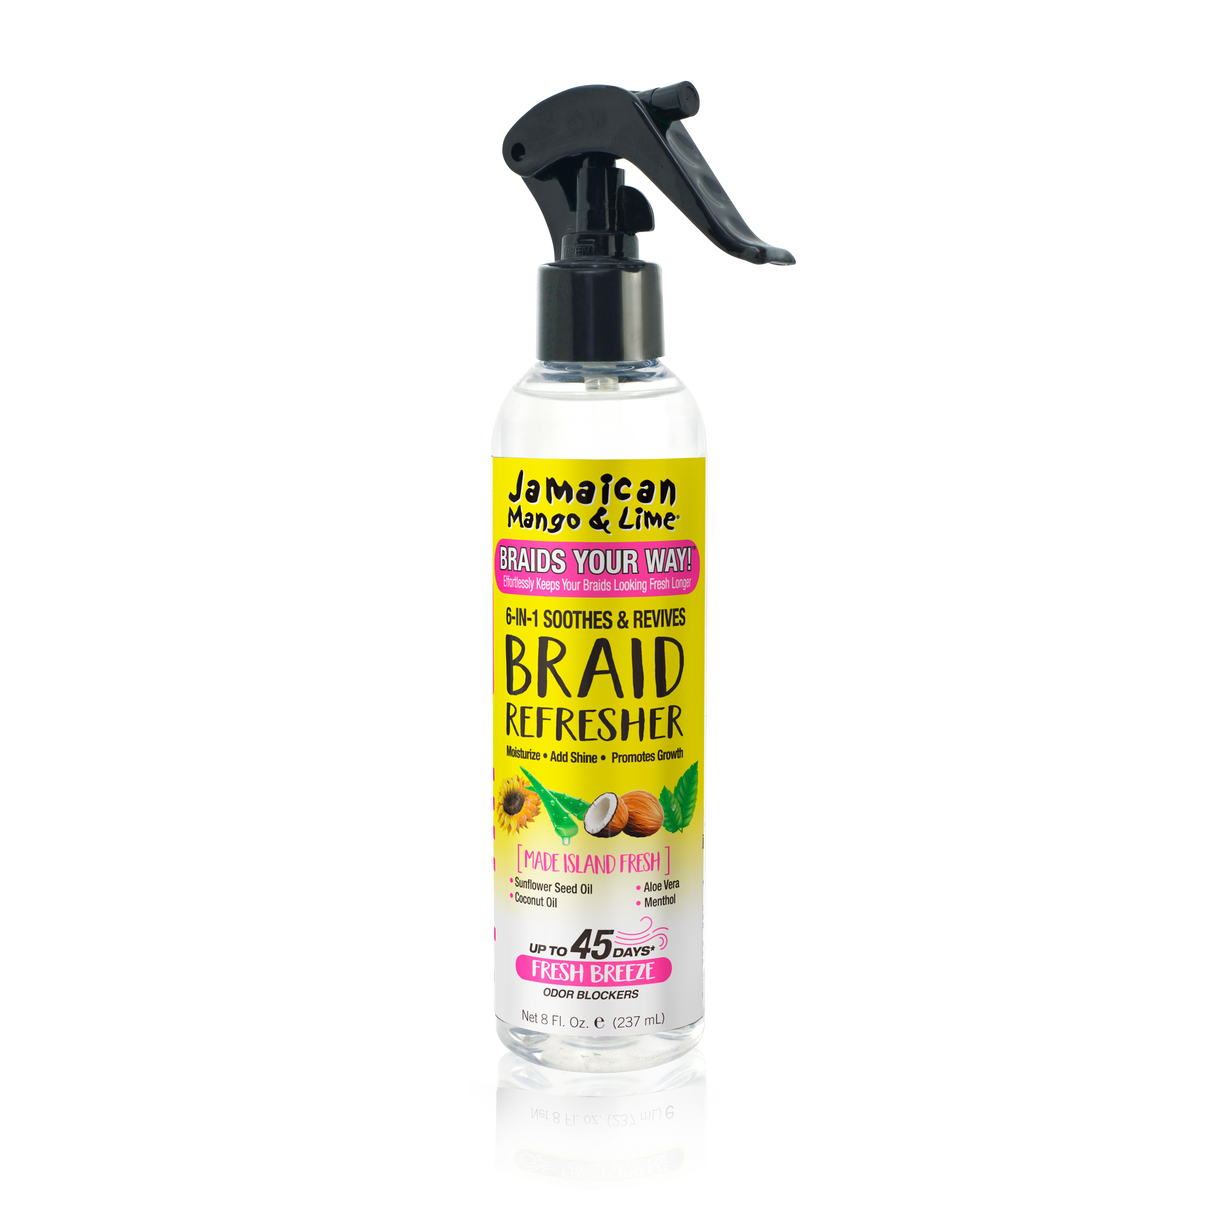 Jamaican Mango & Lime® 6-in-1 Soothes & Revives Braid Refresher